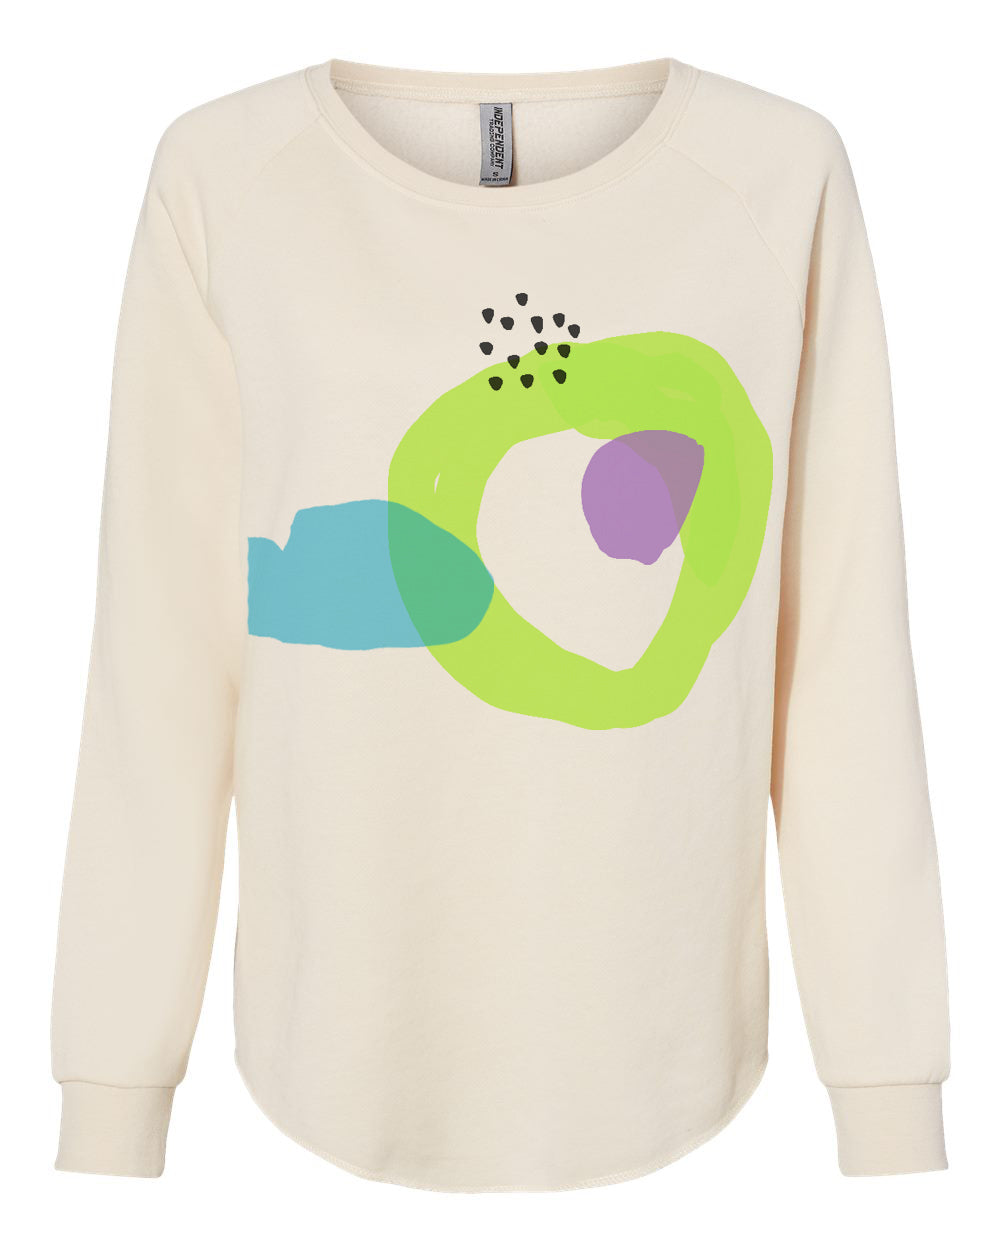 a white sweatshirt with a green and blue graphic on it